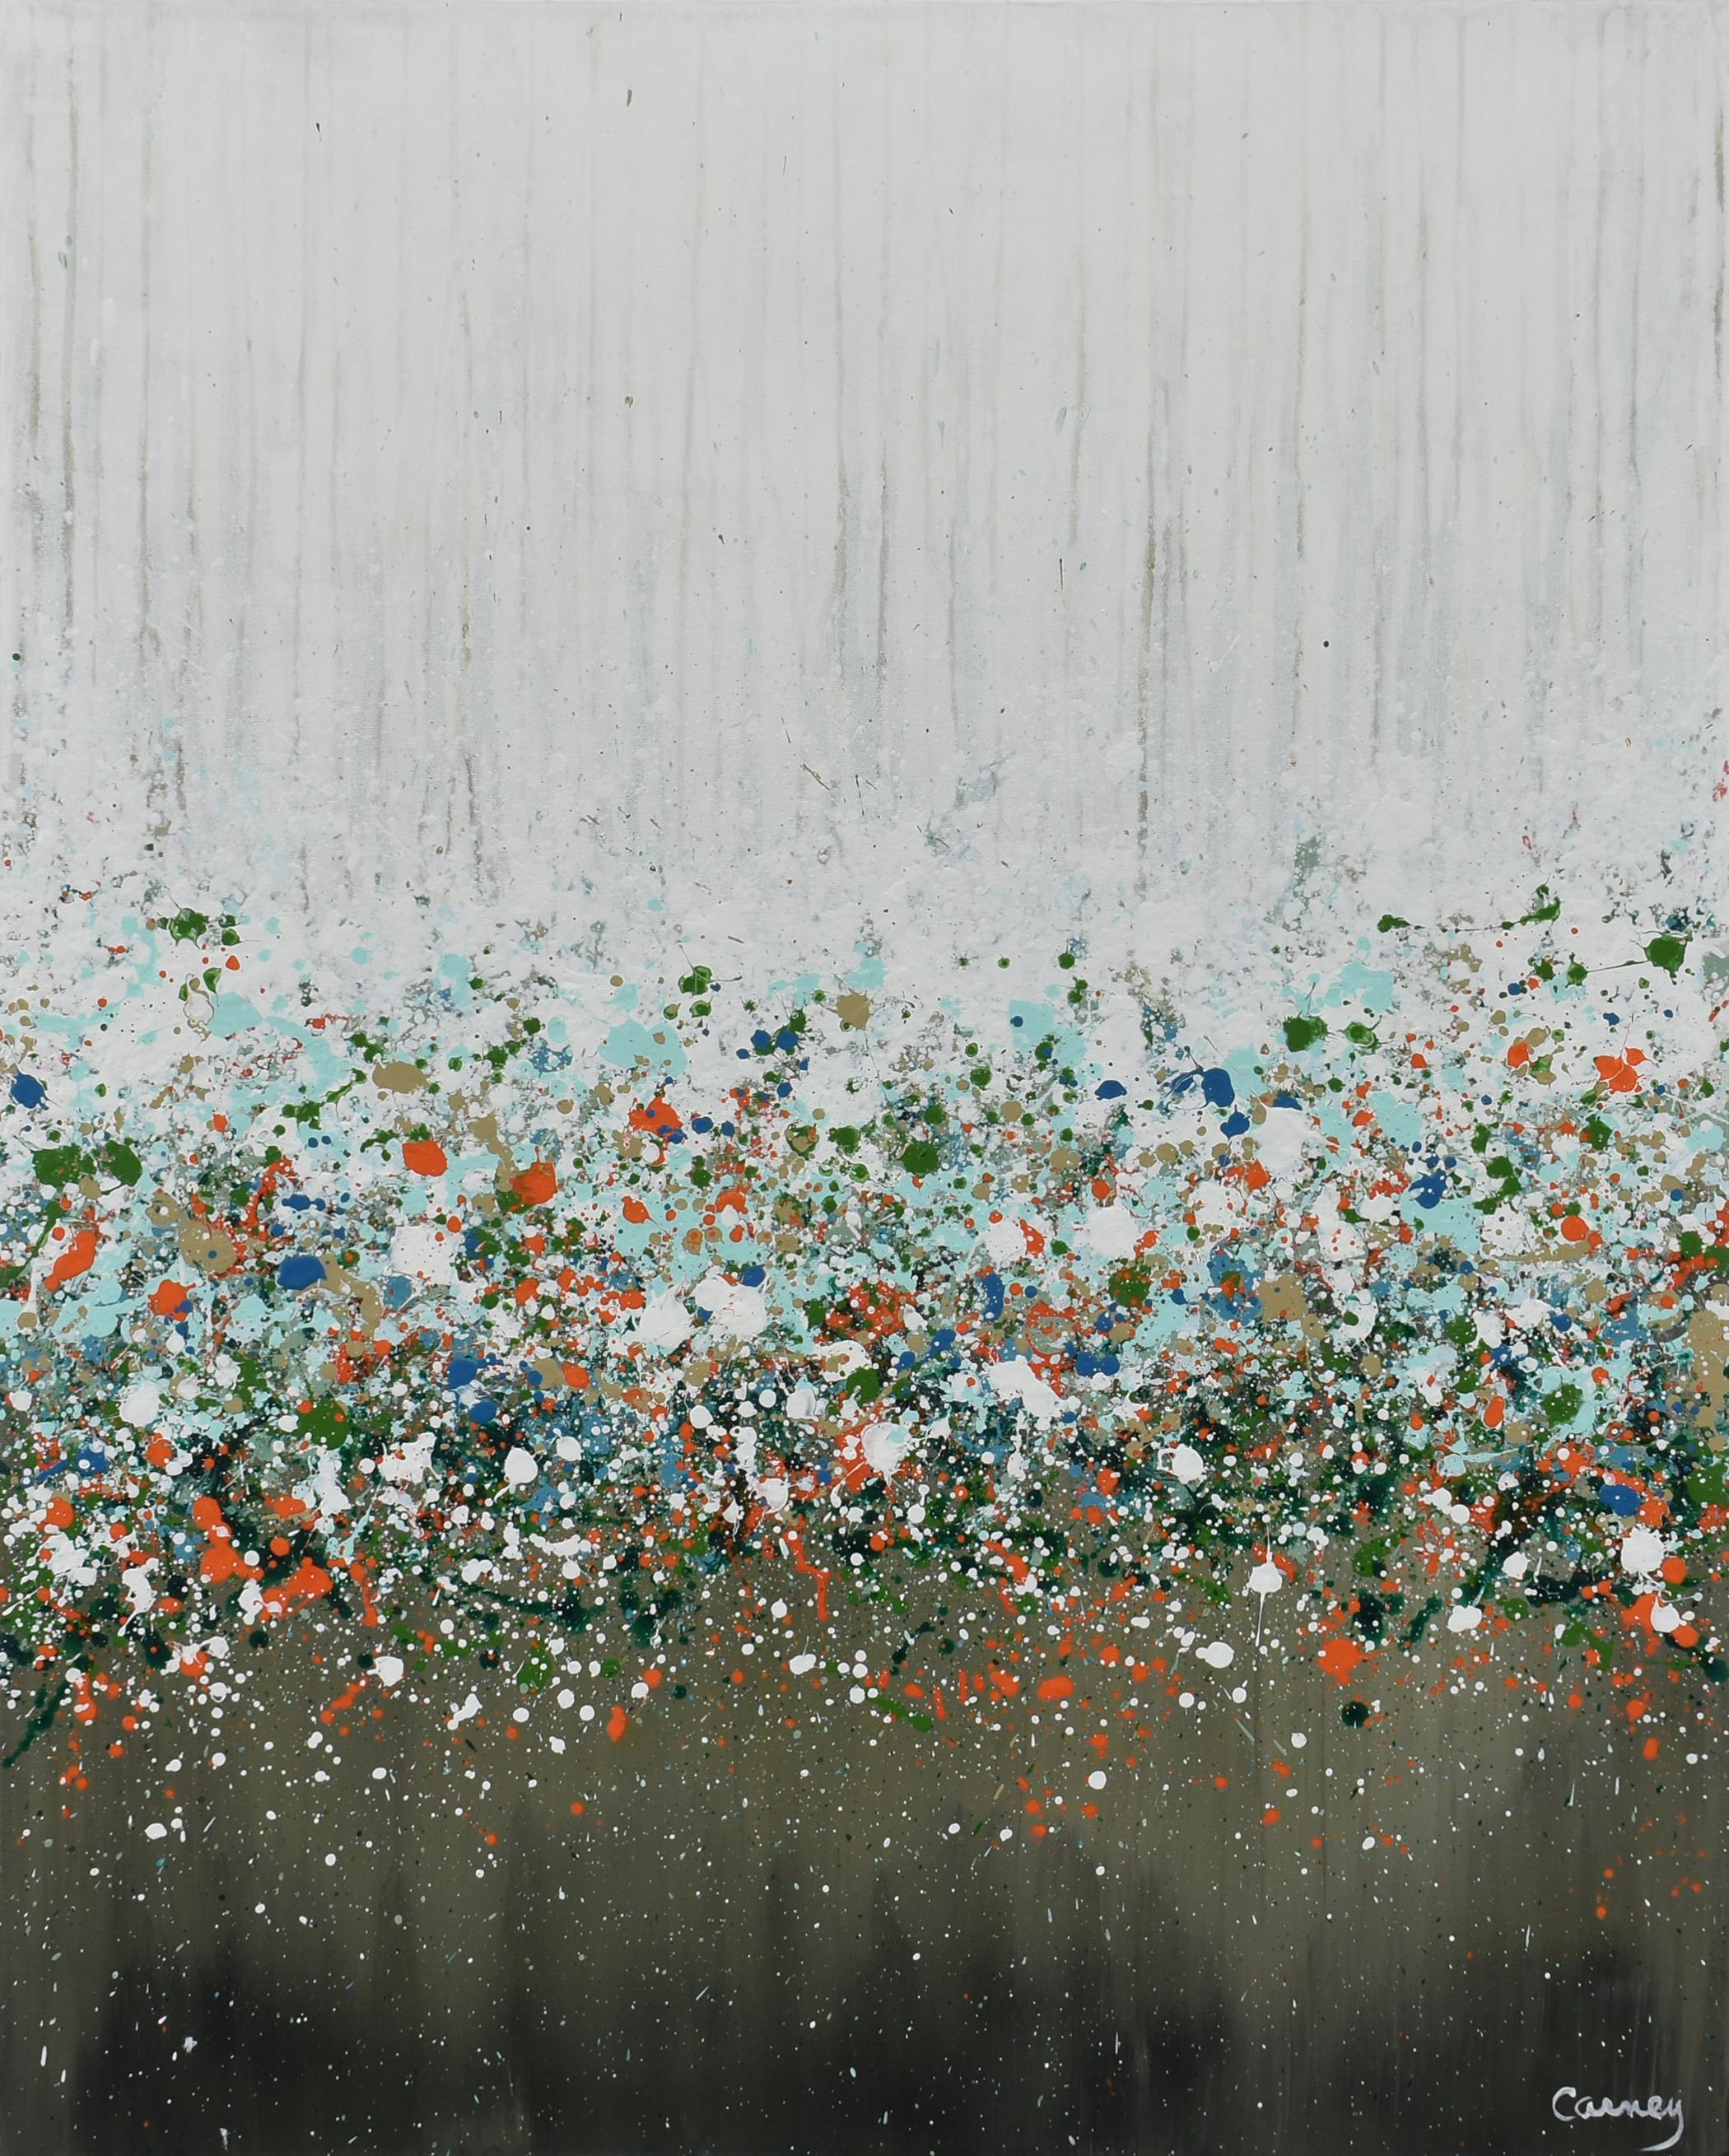 <p>Artist Comments<br />An expressive garden abstraction in shades of green, blue, turquoise, orange, and white. Part of artist Lisa Carney's GeoFlora Series, a collection of abstract landscape paintings where drip and spatter techniques are used to